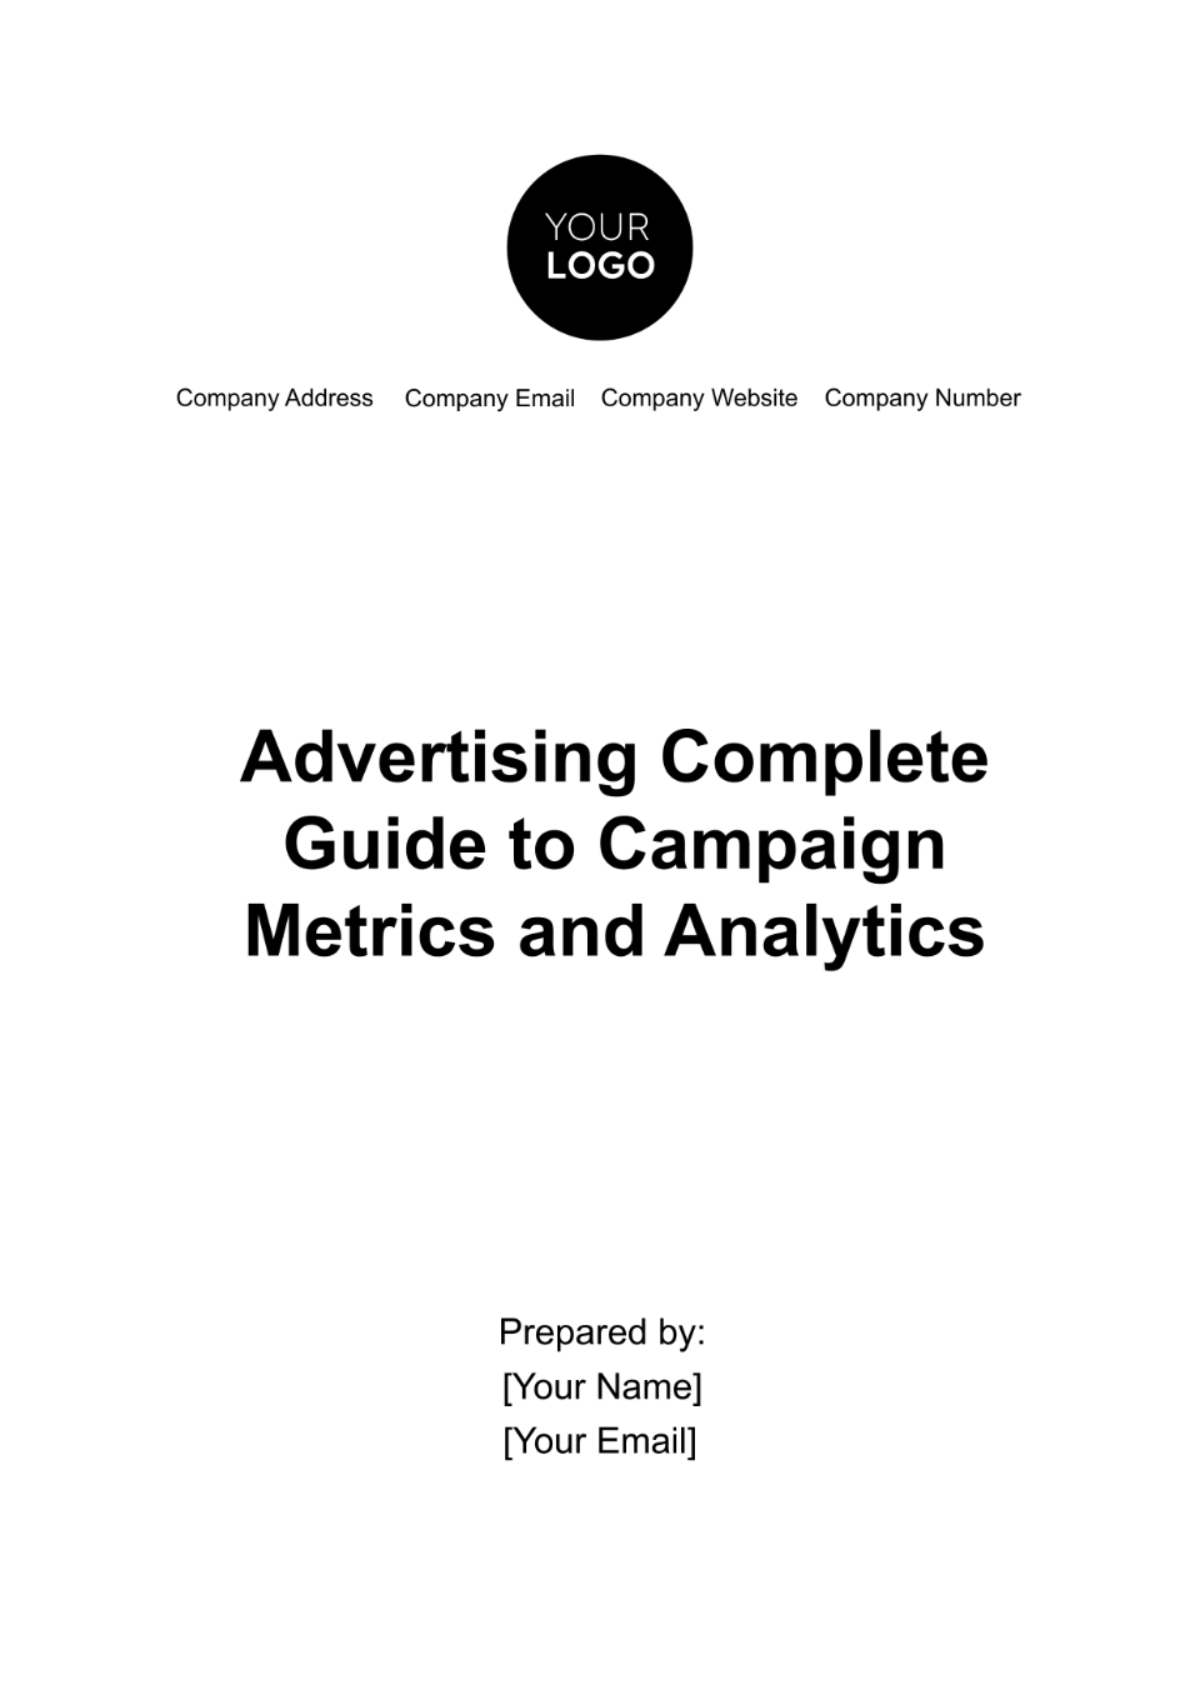 Free Advertising Complete Guide to Campaign Metrics and Analytics Template